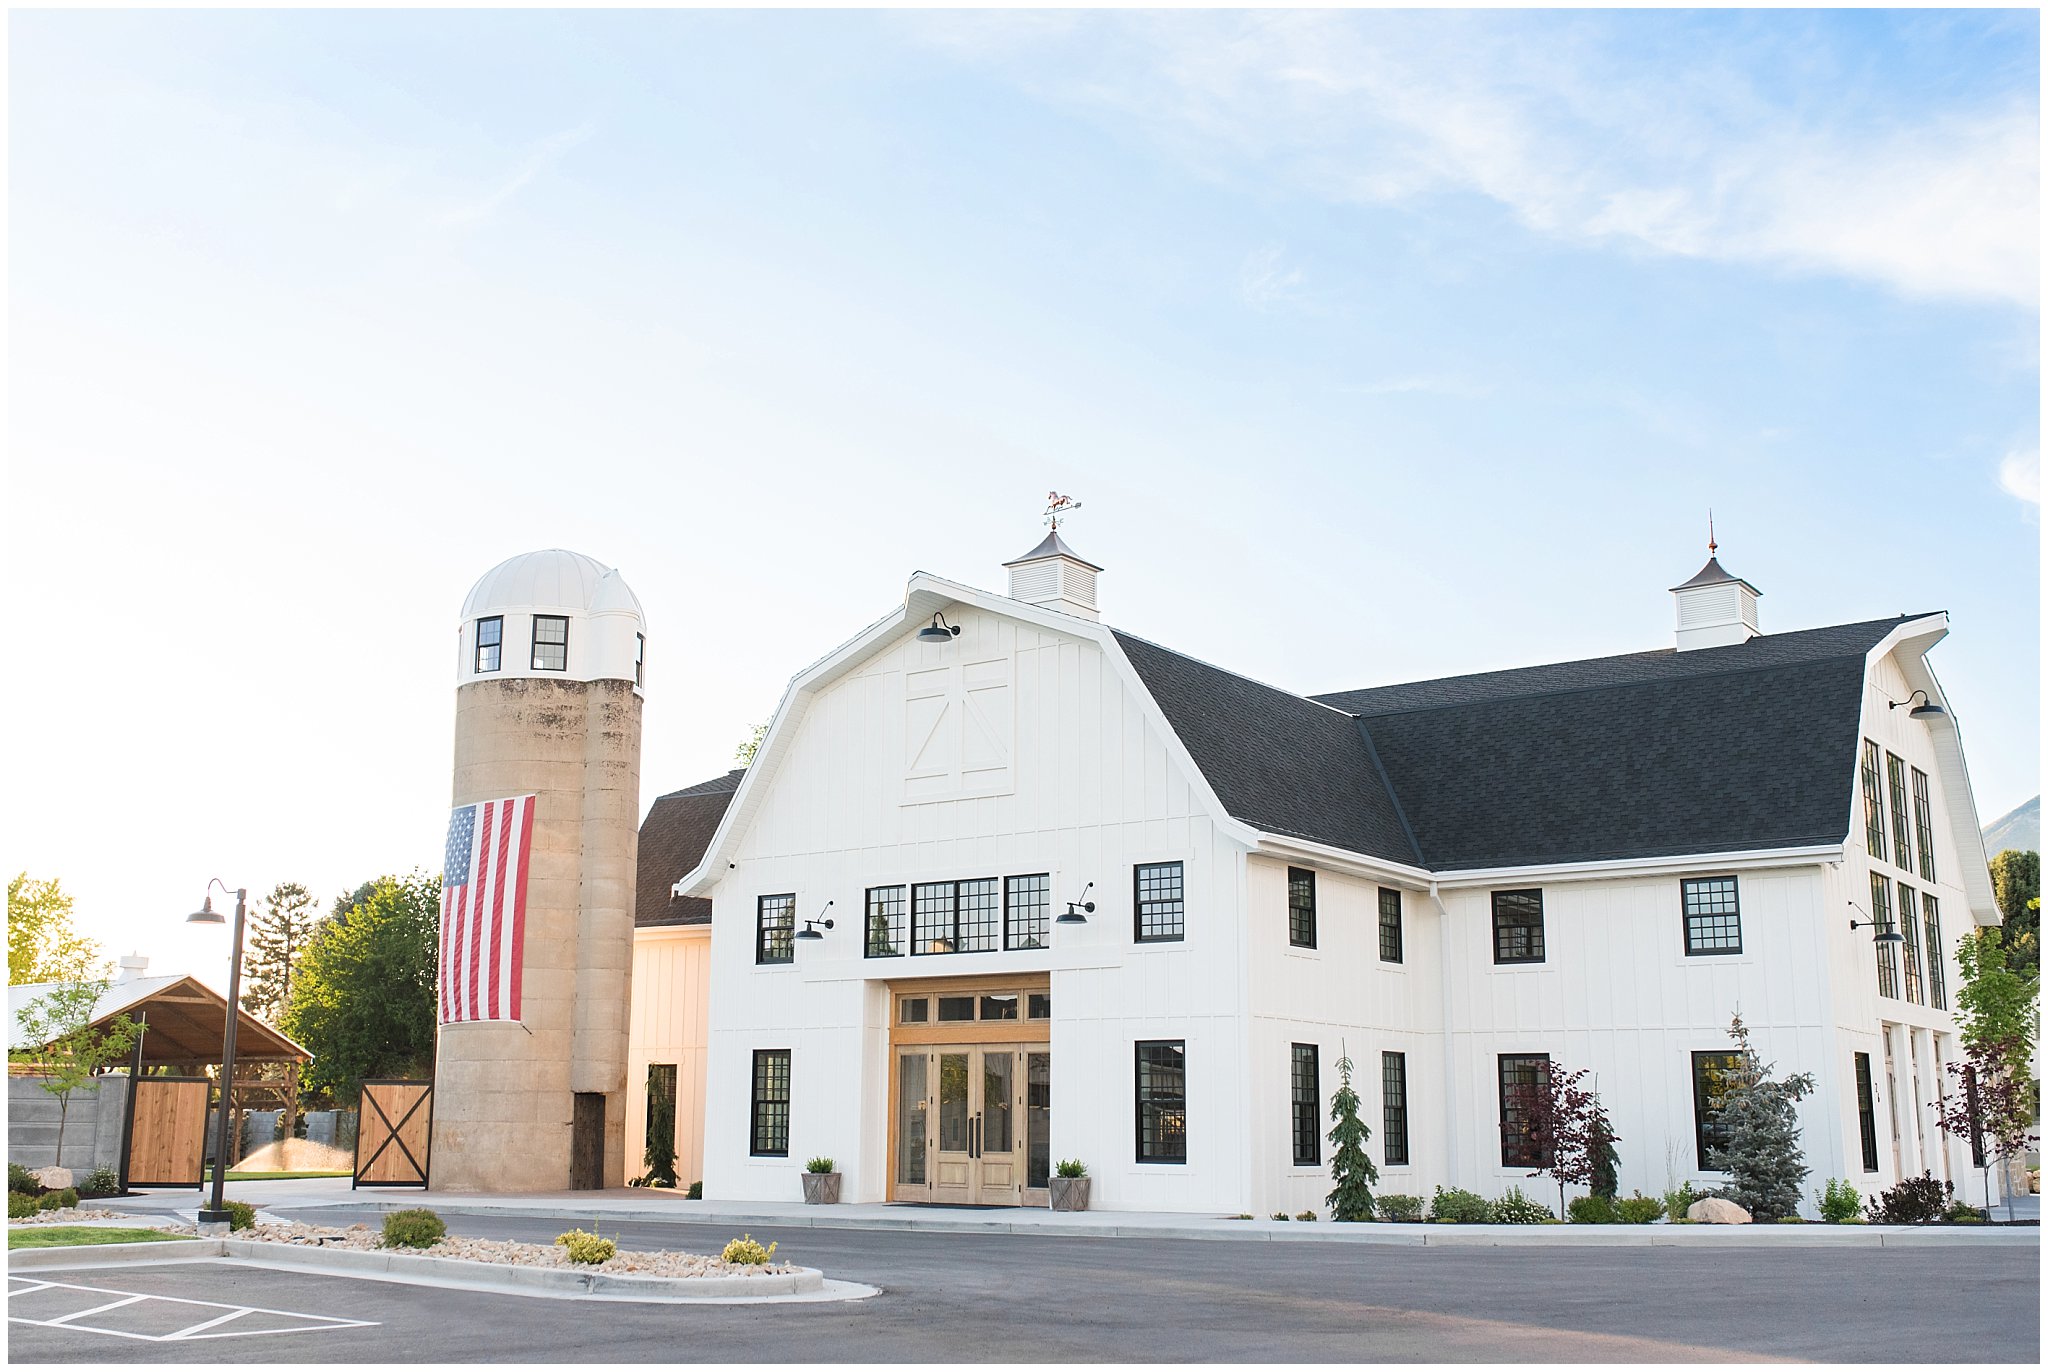 Main Building at Walker Farms | Behind the Scenes of Walker Farms | Utah Wedding Venue | Jessie and Dallin Photography